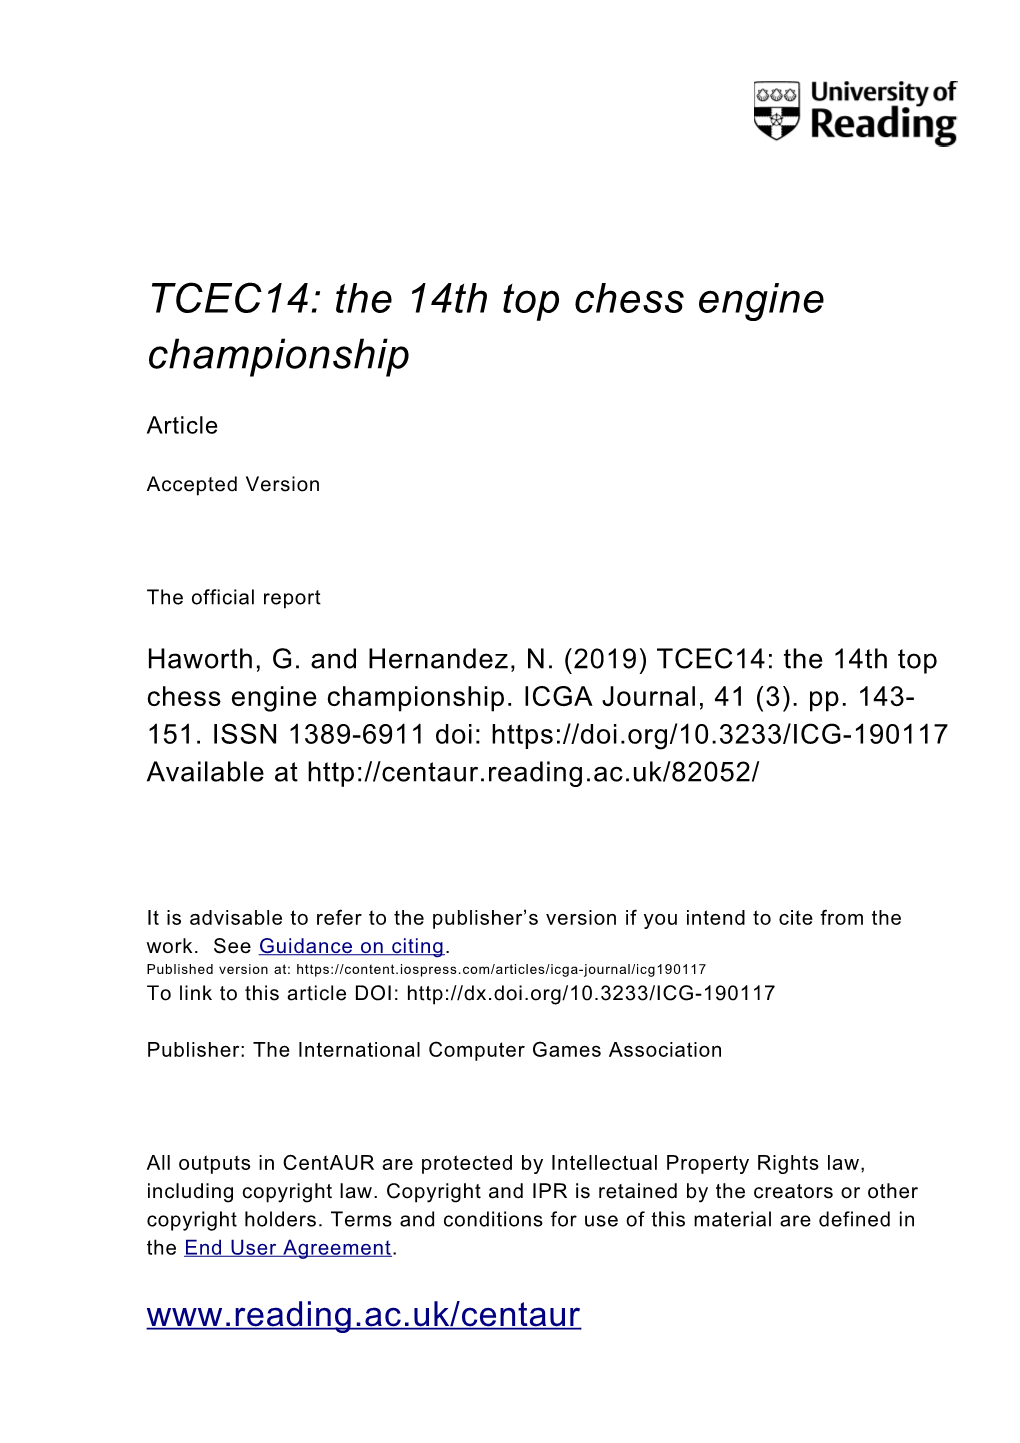 TCEC14: the 14Th Top Chess Engine Championship